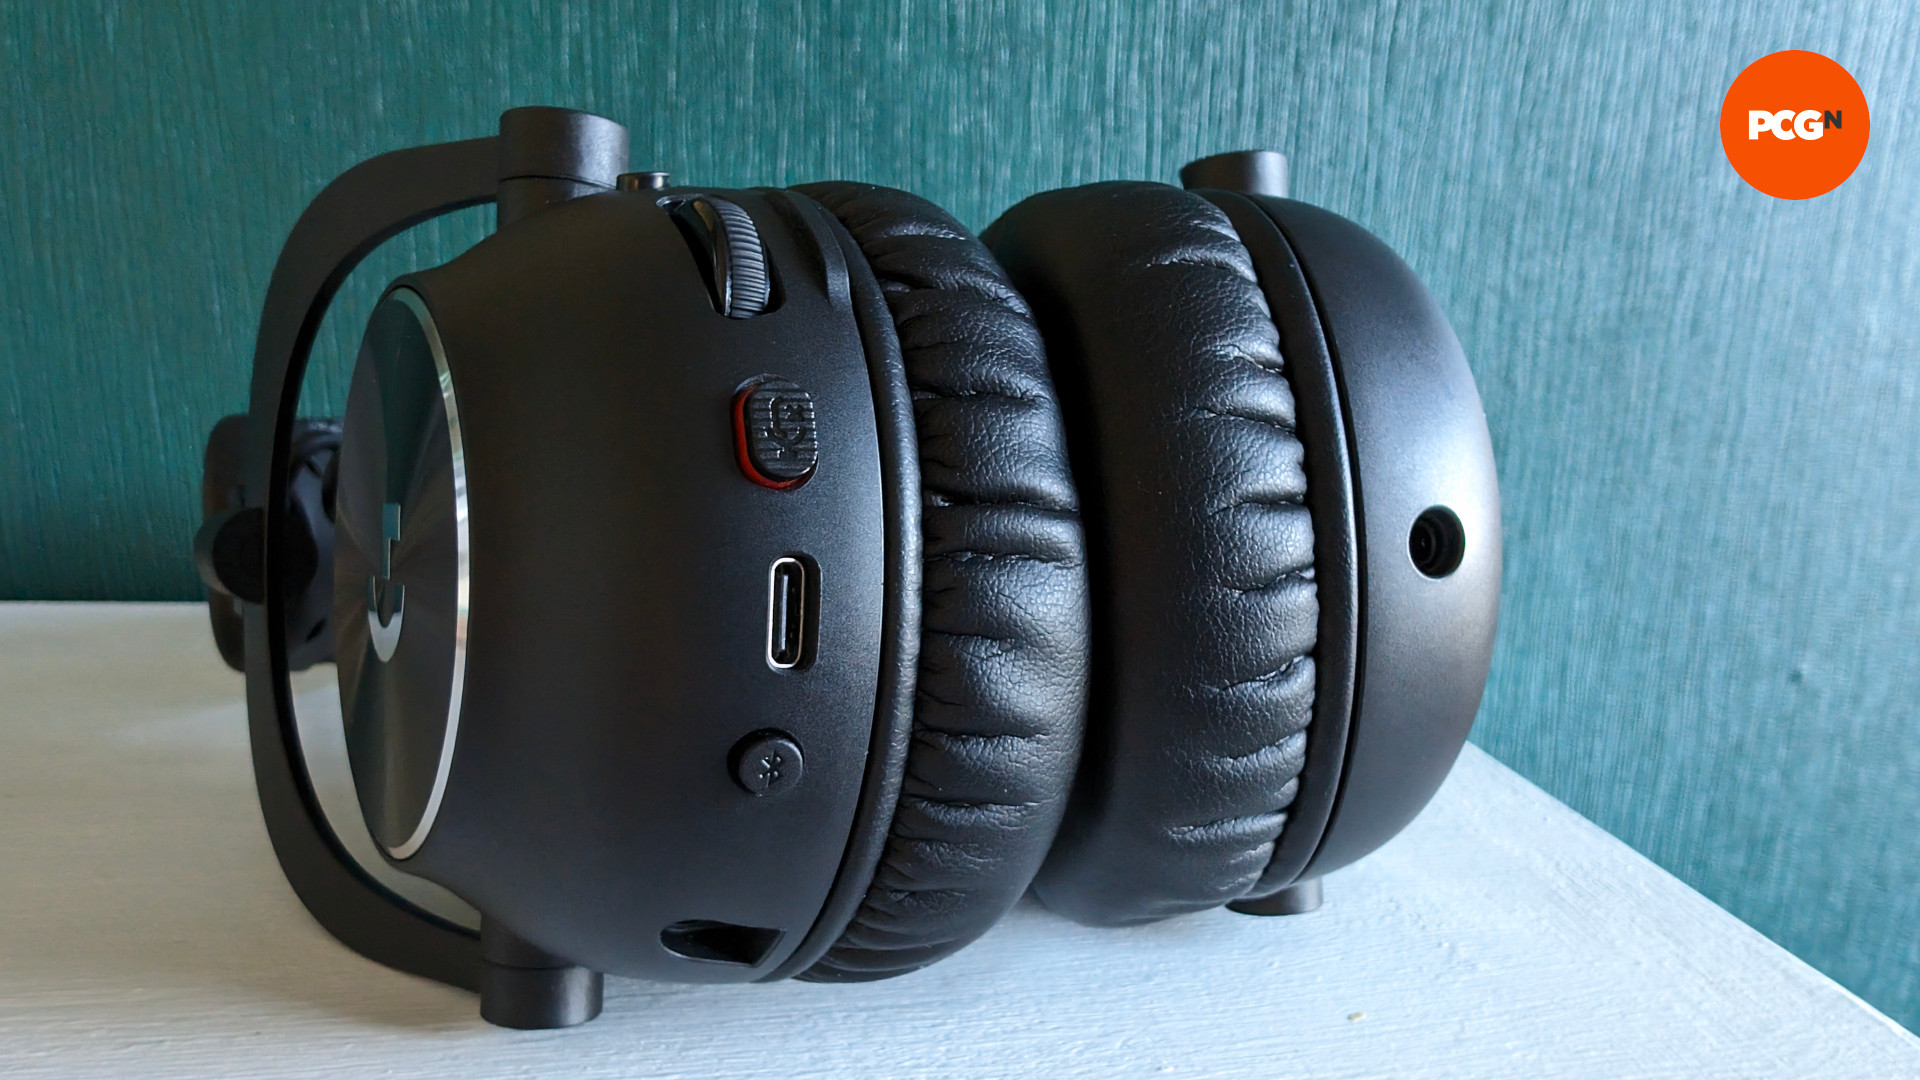 Logitech G Pro X 2 Lightspeed review: good, but with one shortcoming -  digitec